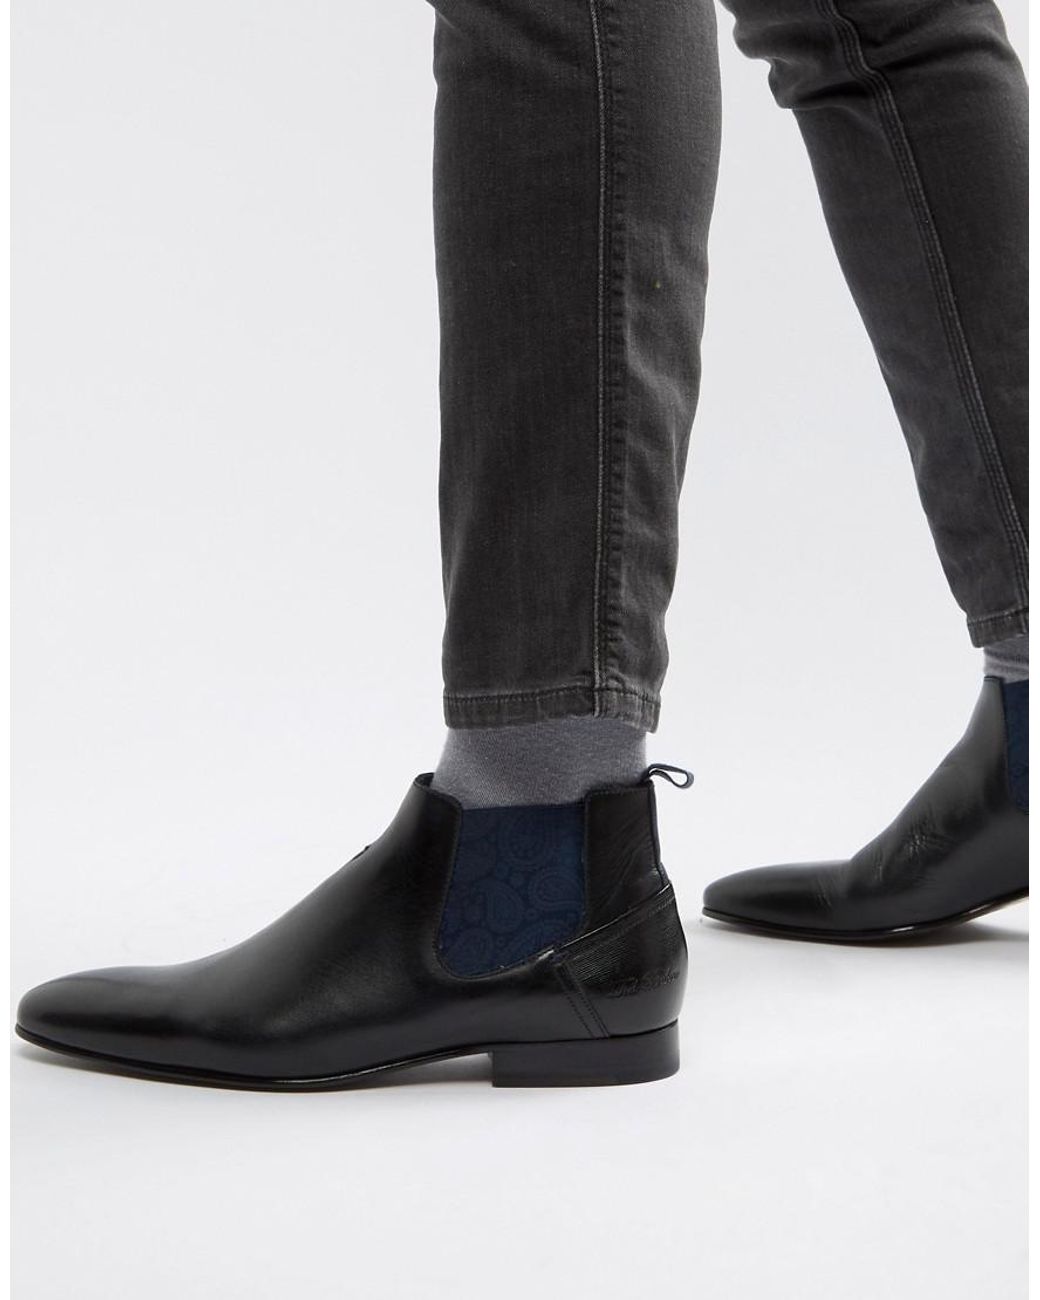 Ted Baker Lowpez Chelsea Boots In Black Leather for Men | Lyst UK